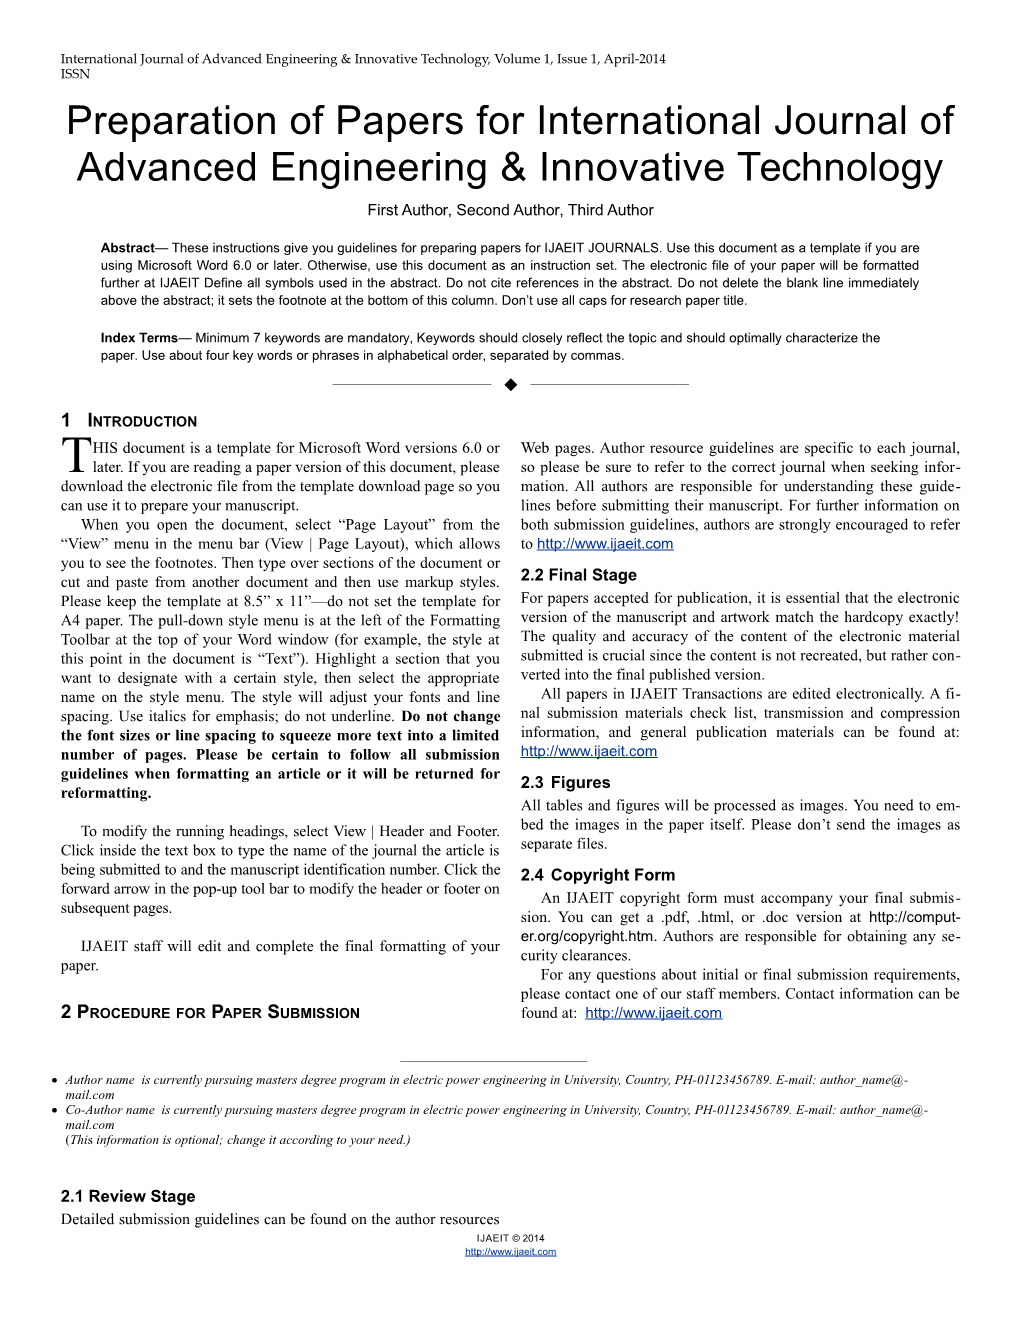 Preparation of Papers for International Journal of Advanced Engineering & Innovative Technology